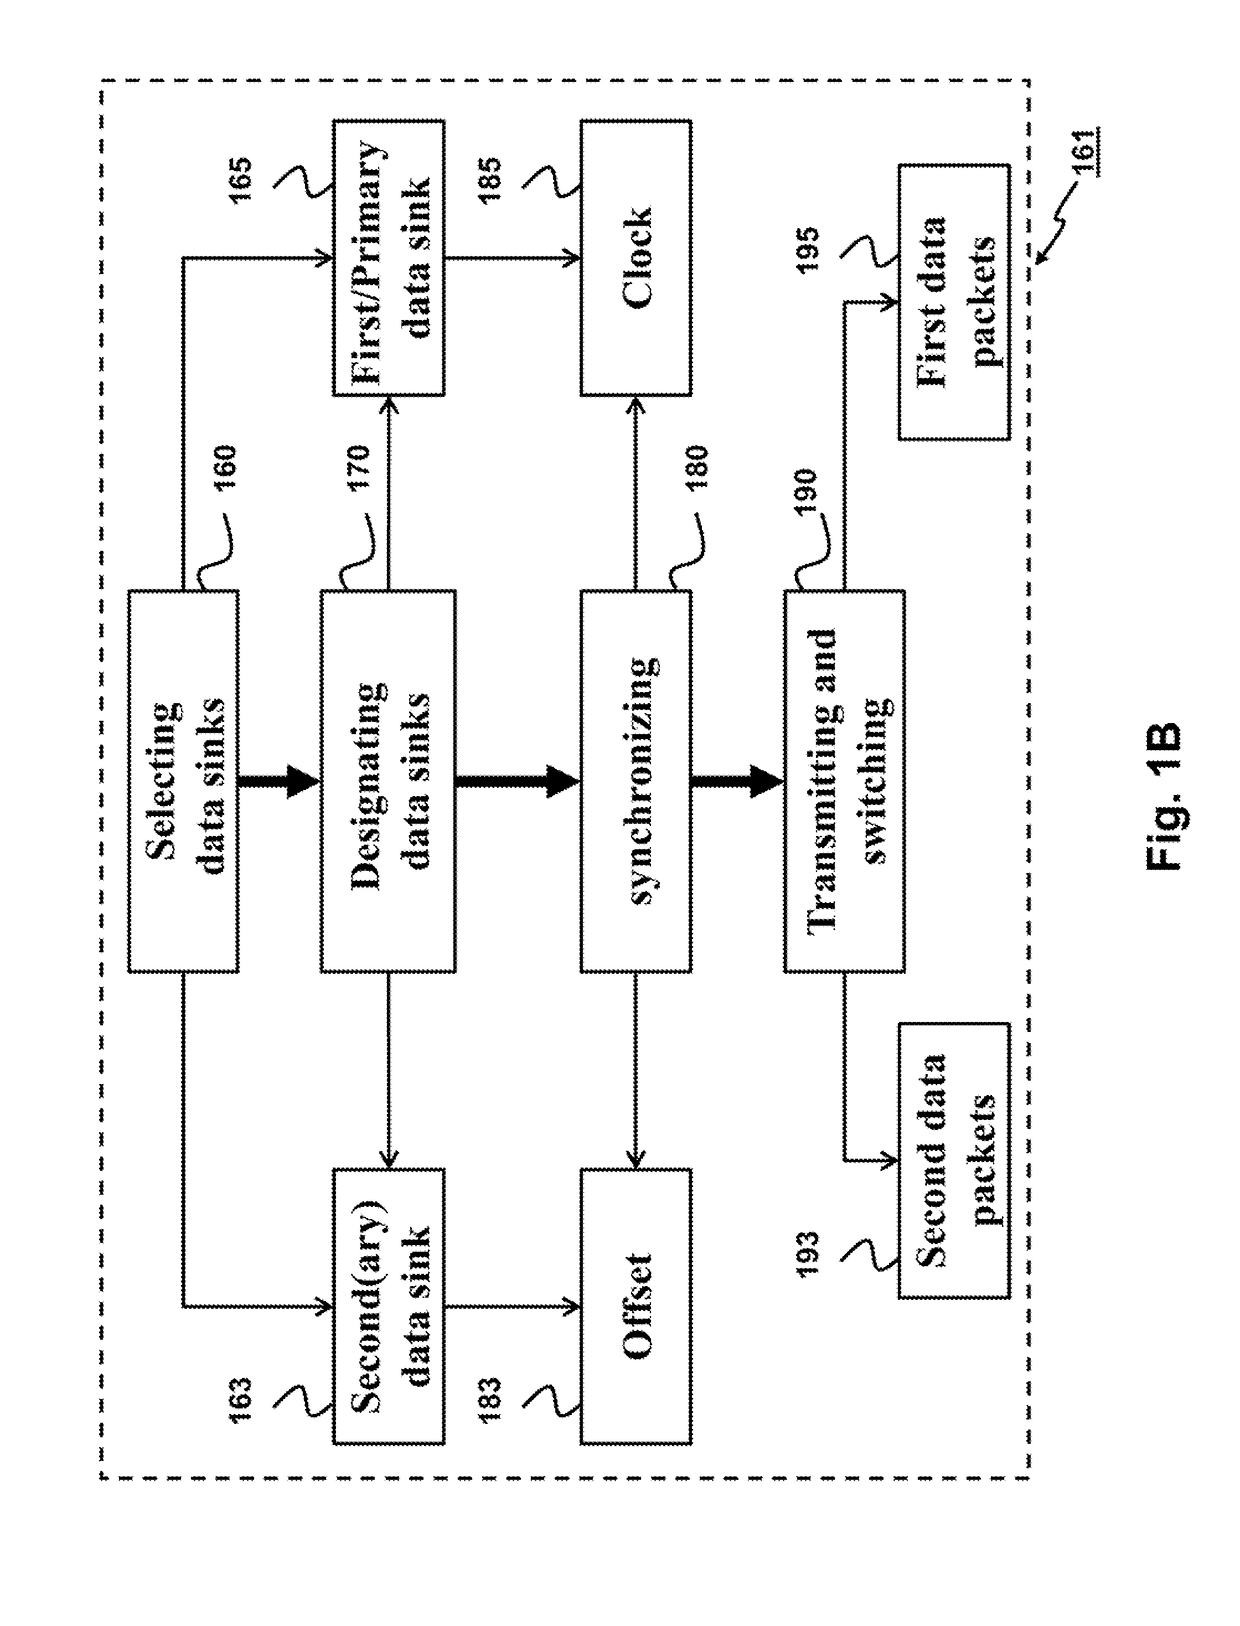 Synchronized multi-sink routing for wireless networks